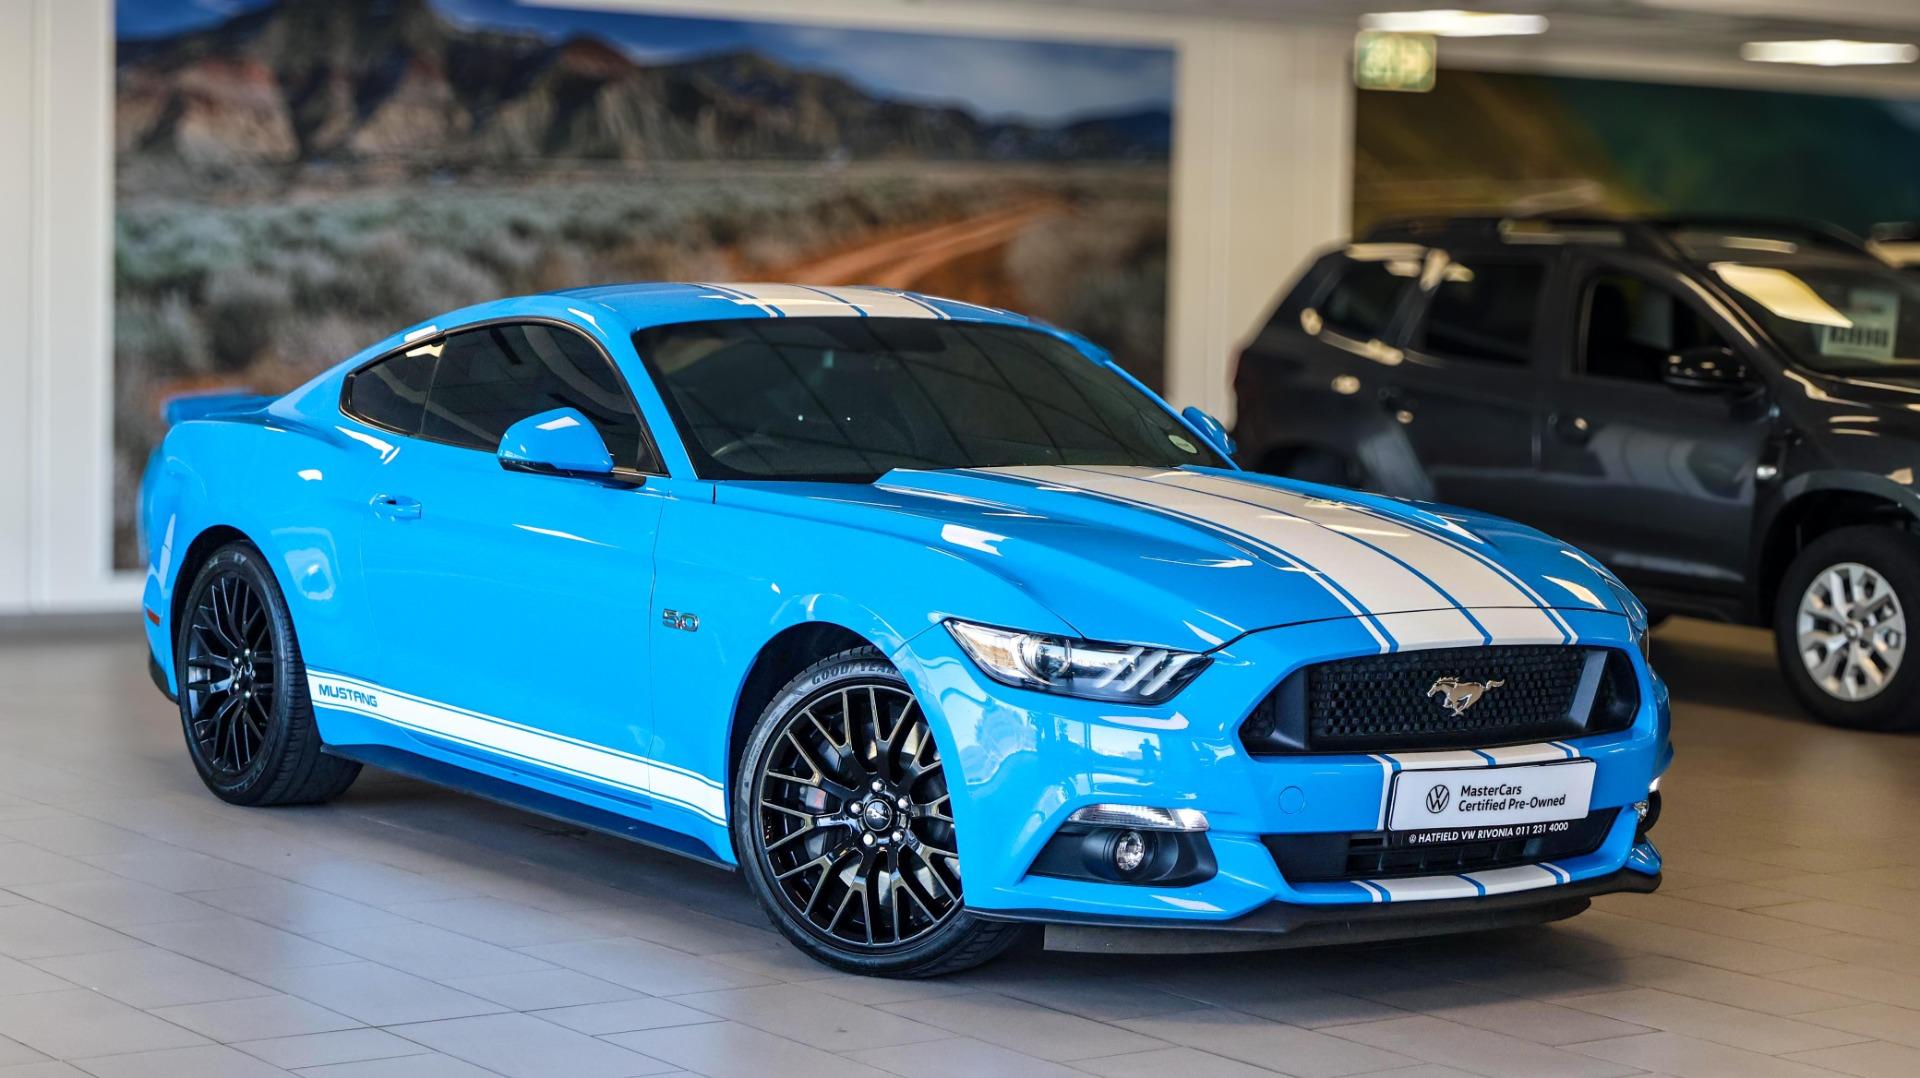 2018 Ford Mustang 5.0 GT Fastback Auto For Sale